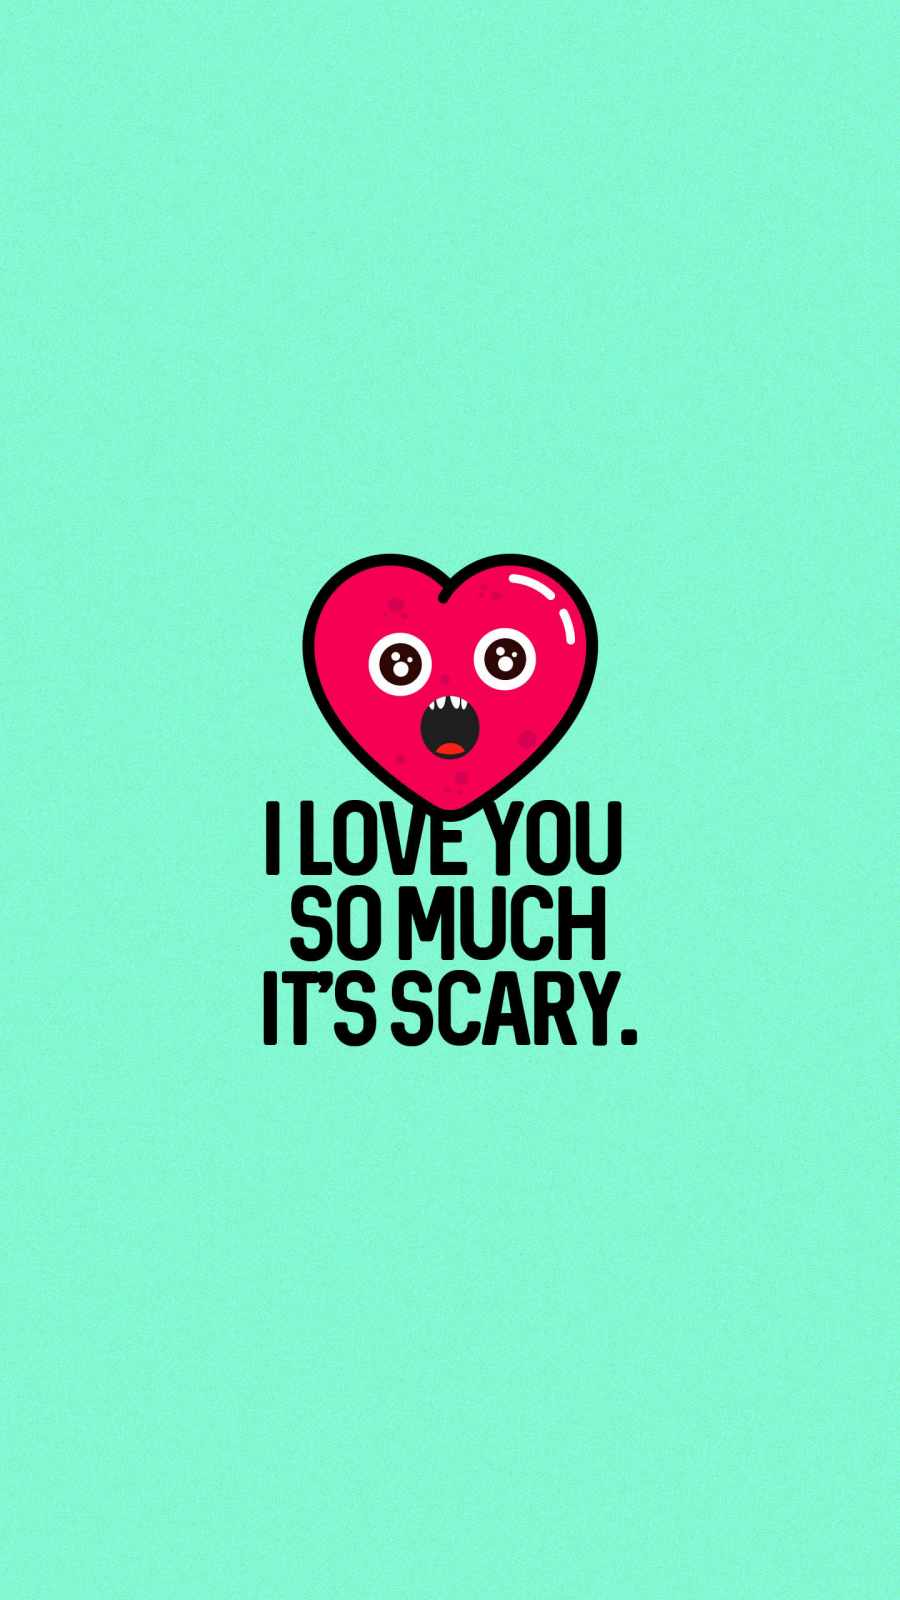 Scary Love IPhone Wallpaper  IPhone Wallpapers